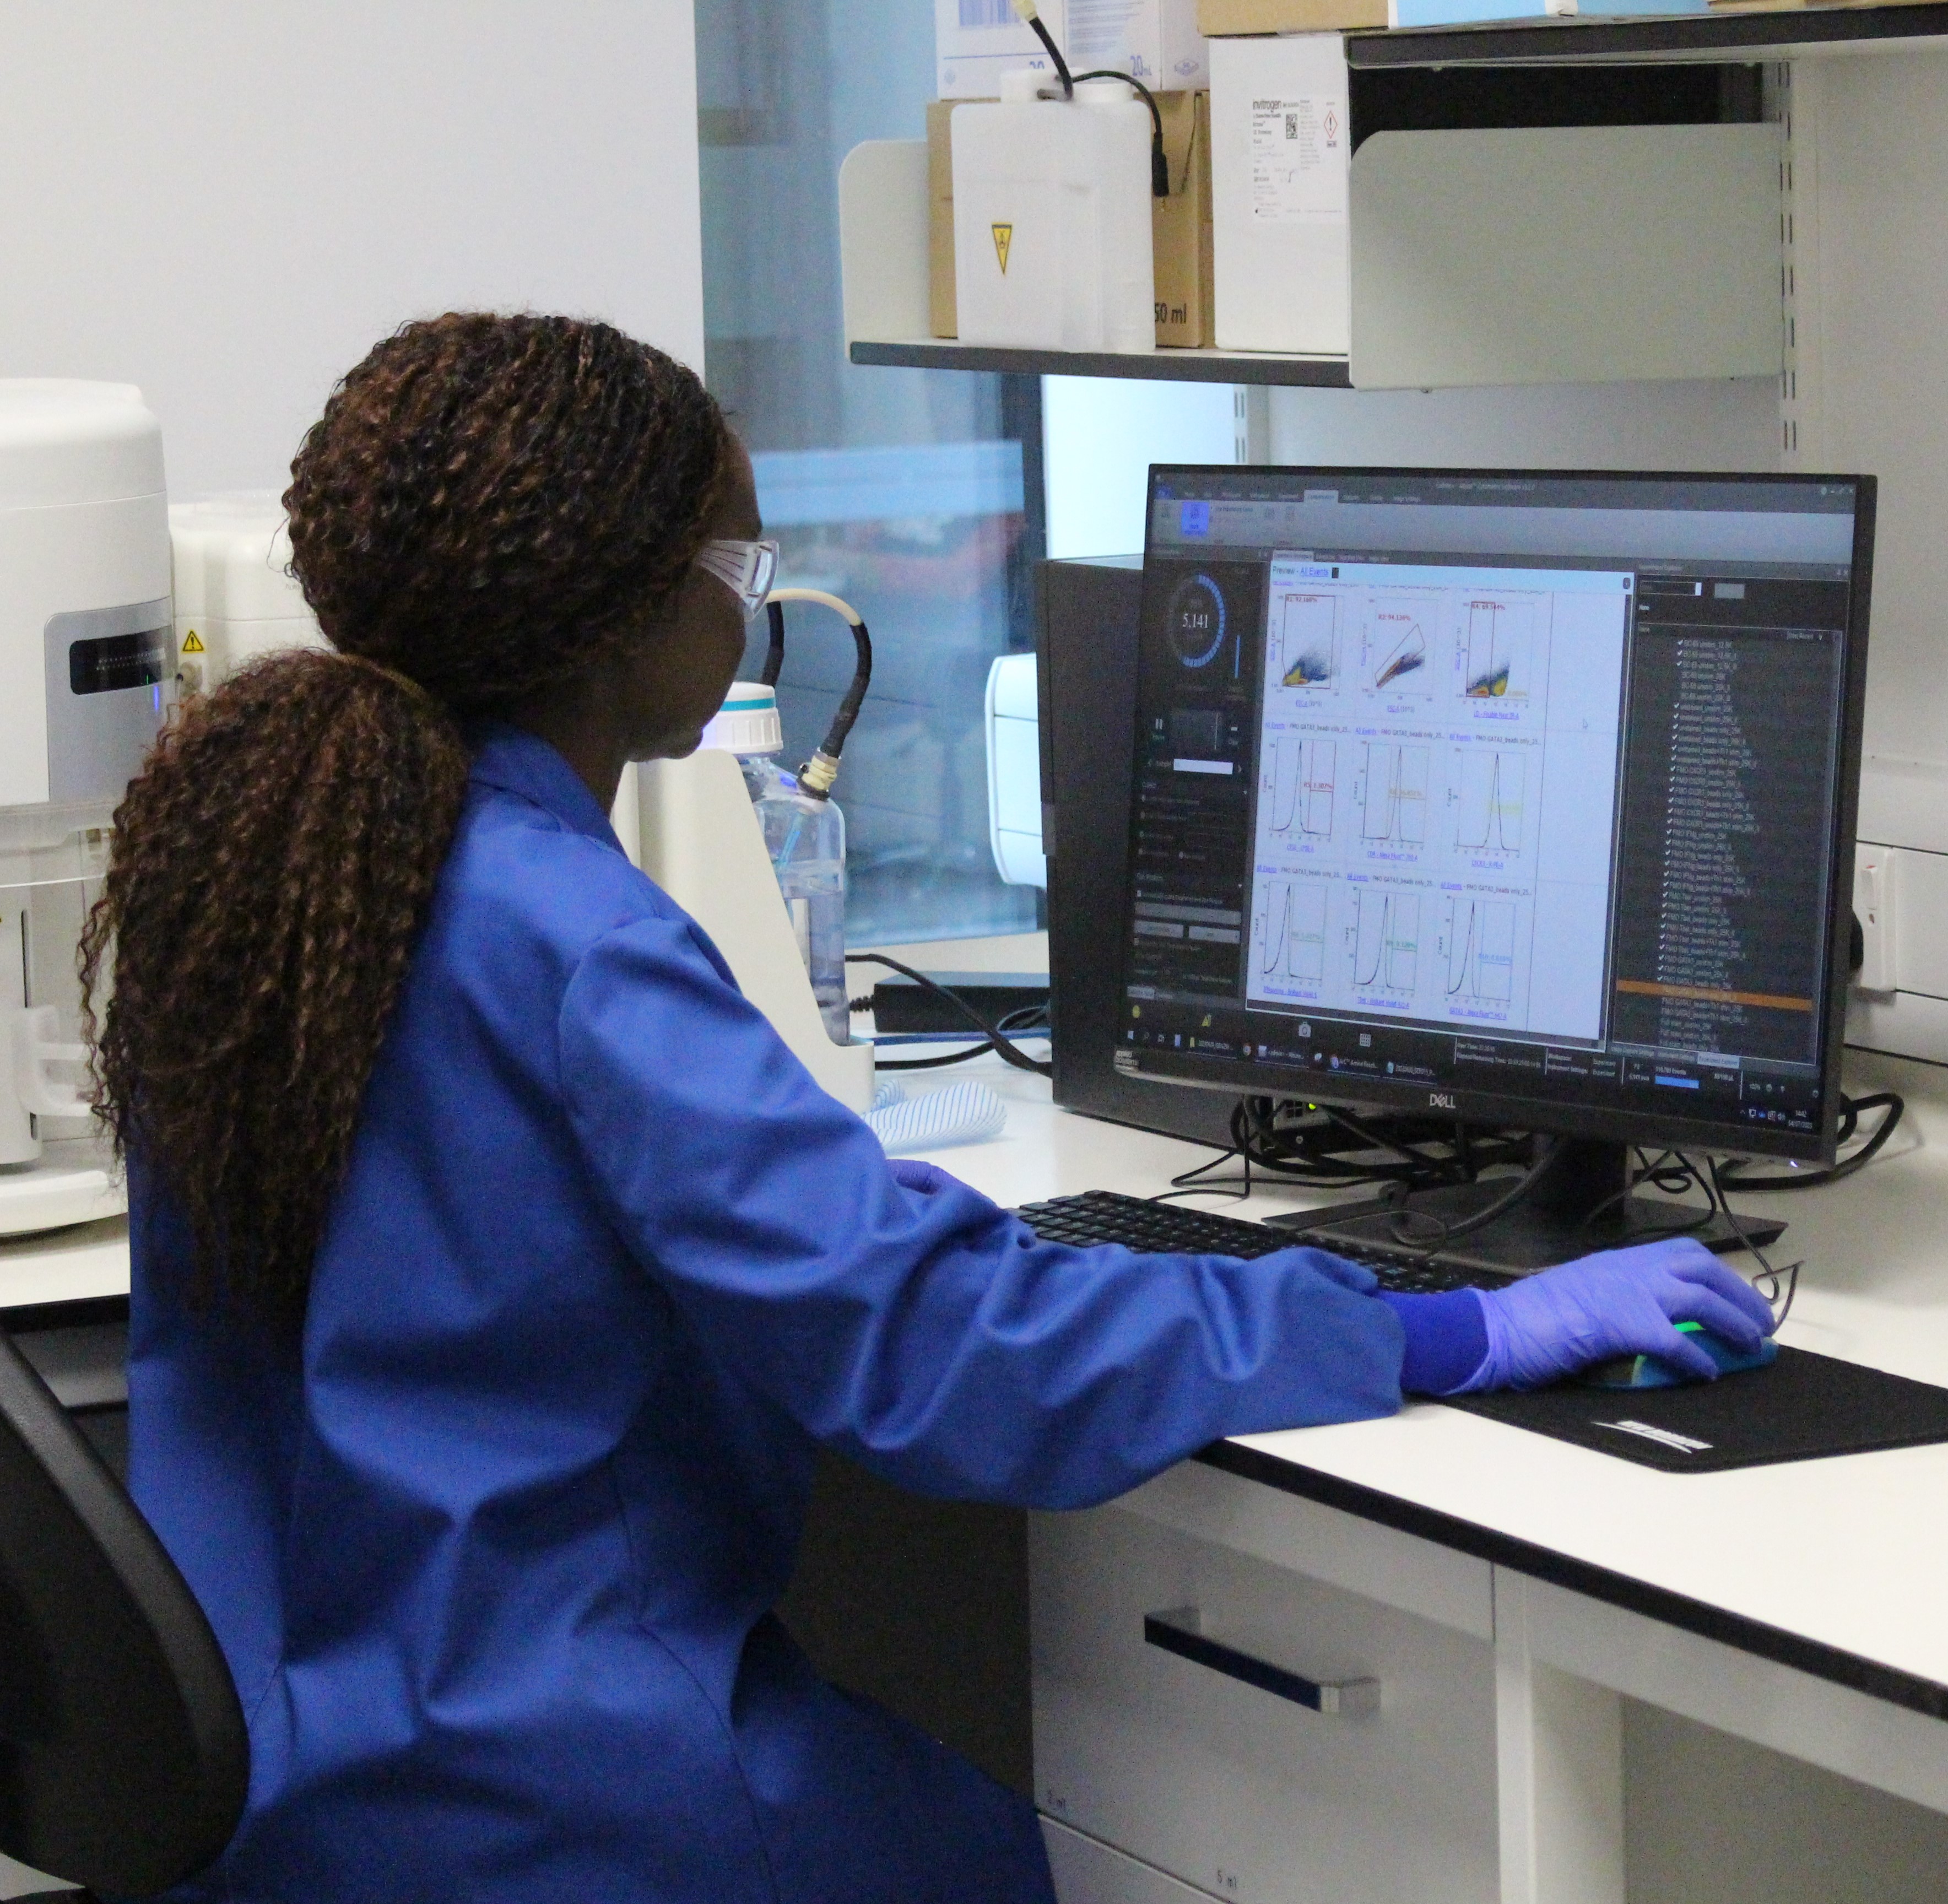 Researcher using a computer programme in the lab